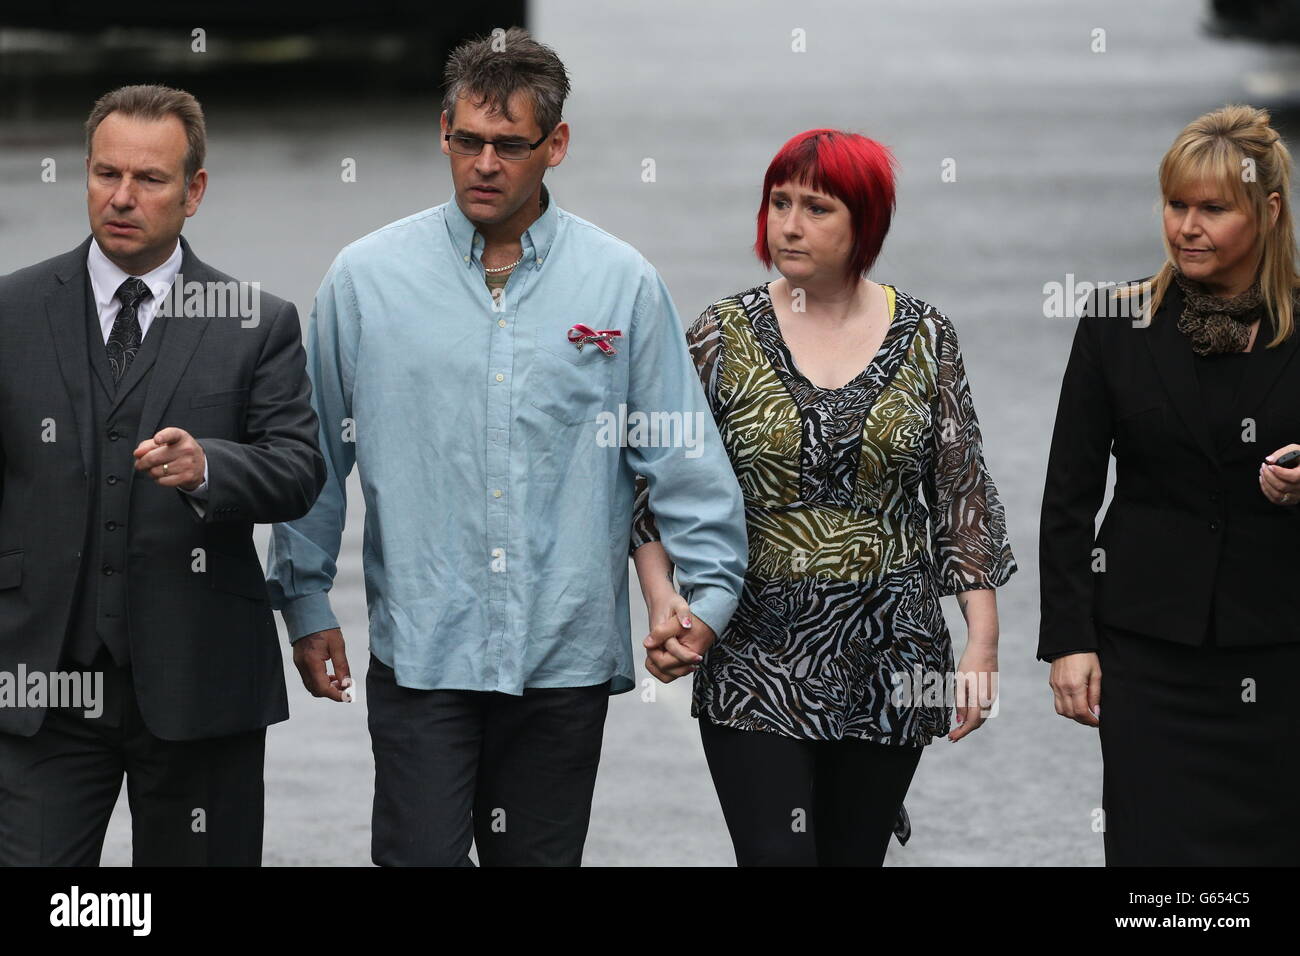 Paul and Coral Jones (centre), the parents of April Jones arrive at Mold Crown Court, as the jury continues considering its verdicts today, against Mark Bridger, the man accused of the murder of their daughter April, after it was sent out to begin its deliberations yesterday afternoon after a month long trial. Stock Photo